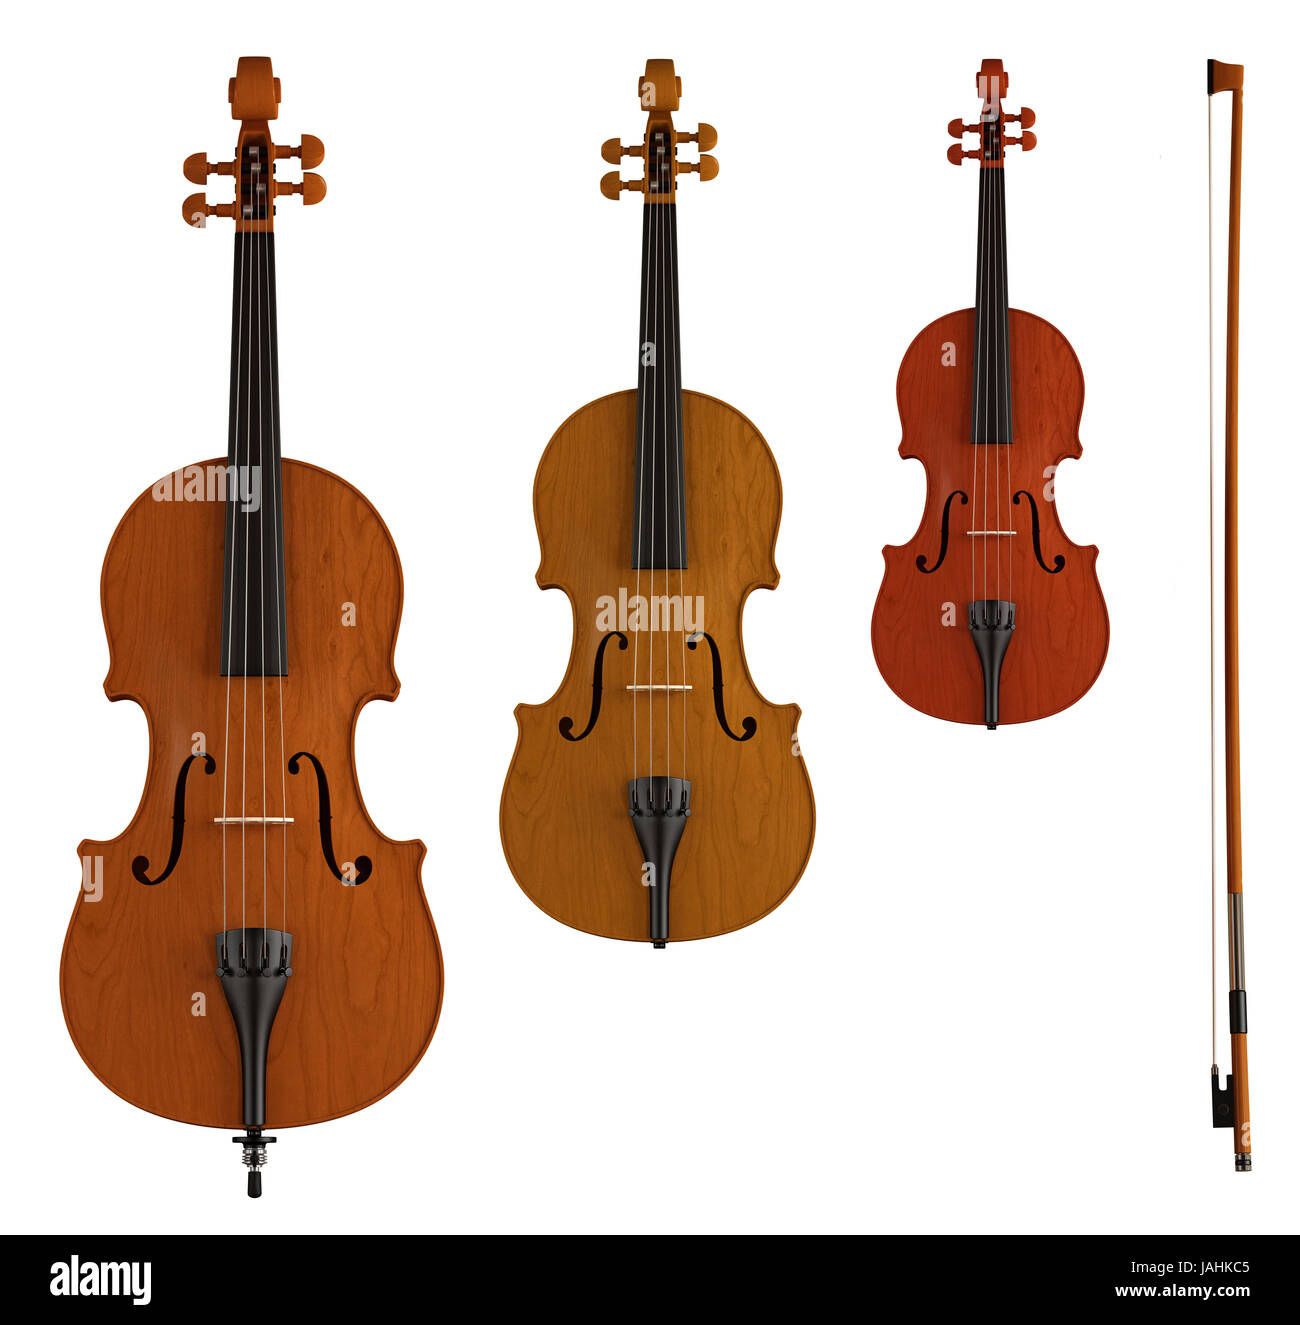 Violin Viola Cello Bass High Resolution Stock Photography and Images - Alamy